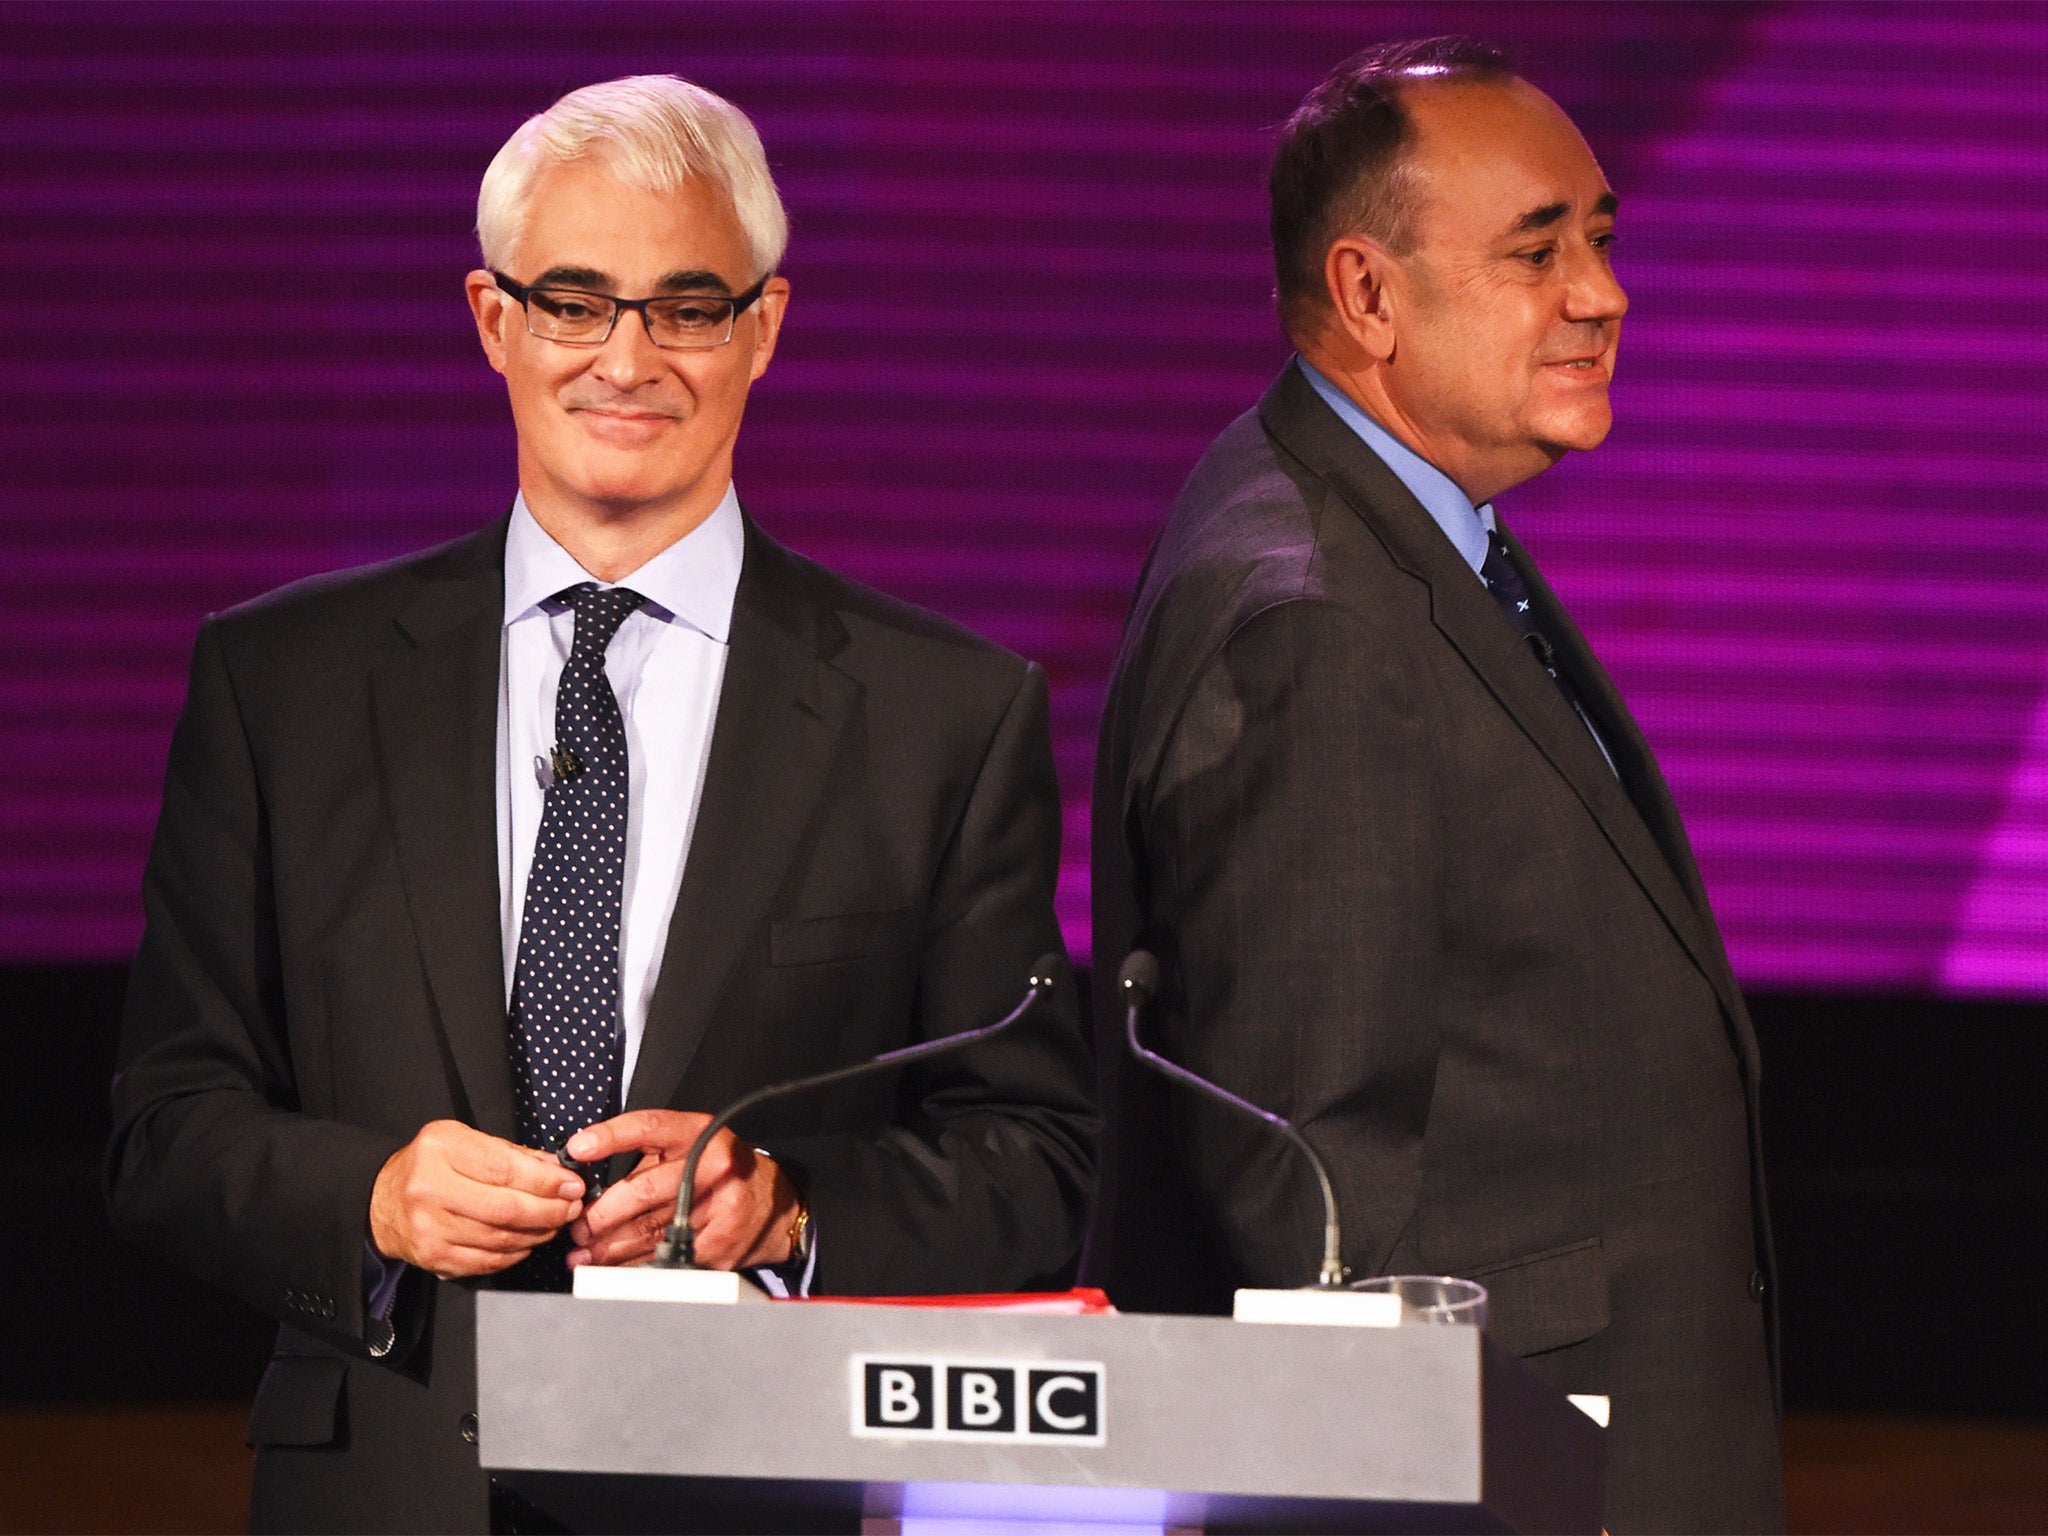 Alex Salmond and Alistair Darling taking part in a live television debate in Glasgow on Monday